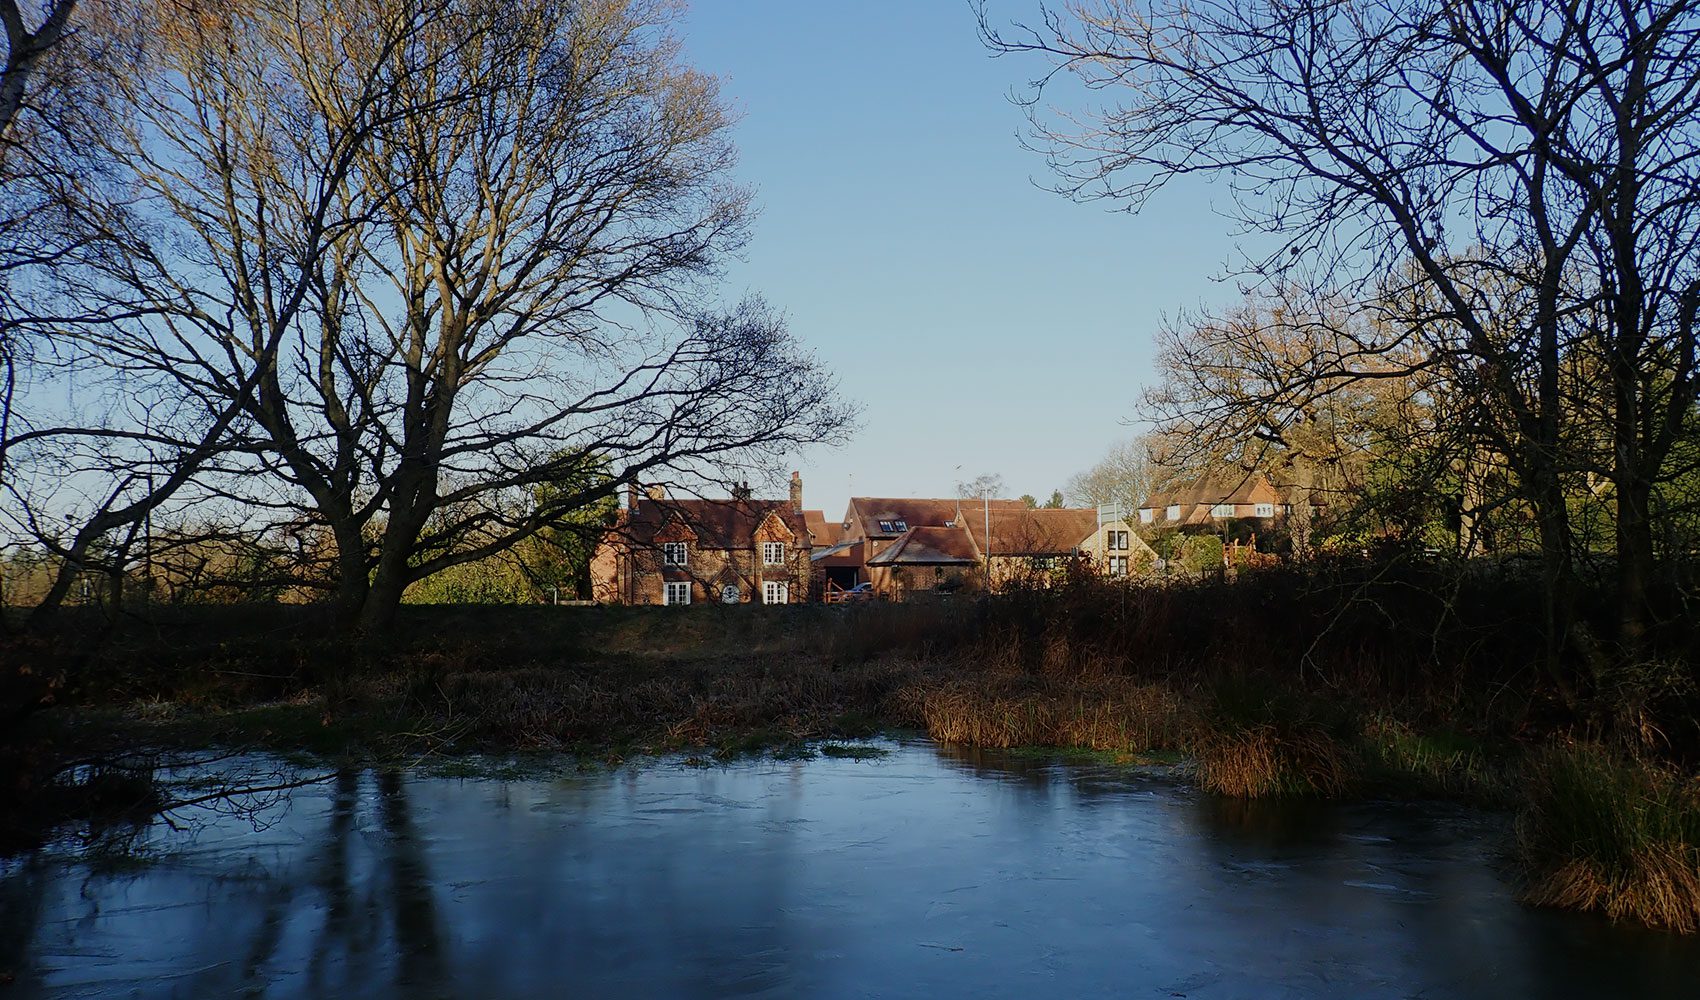 Homes in Hertfordshire next to a river